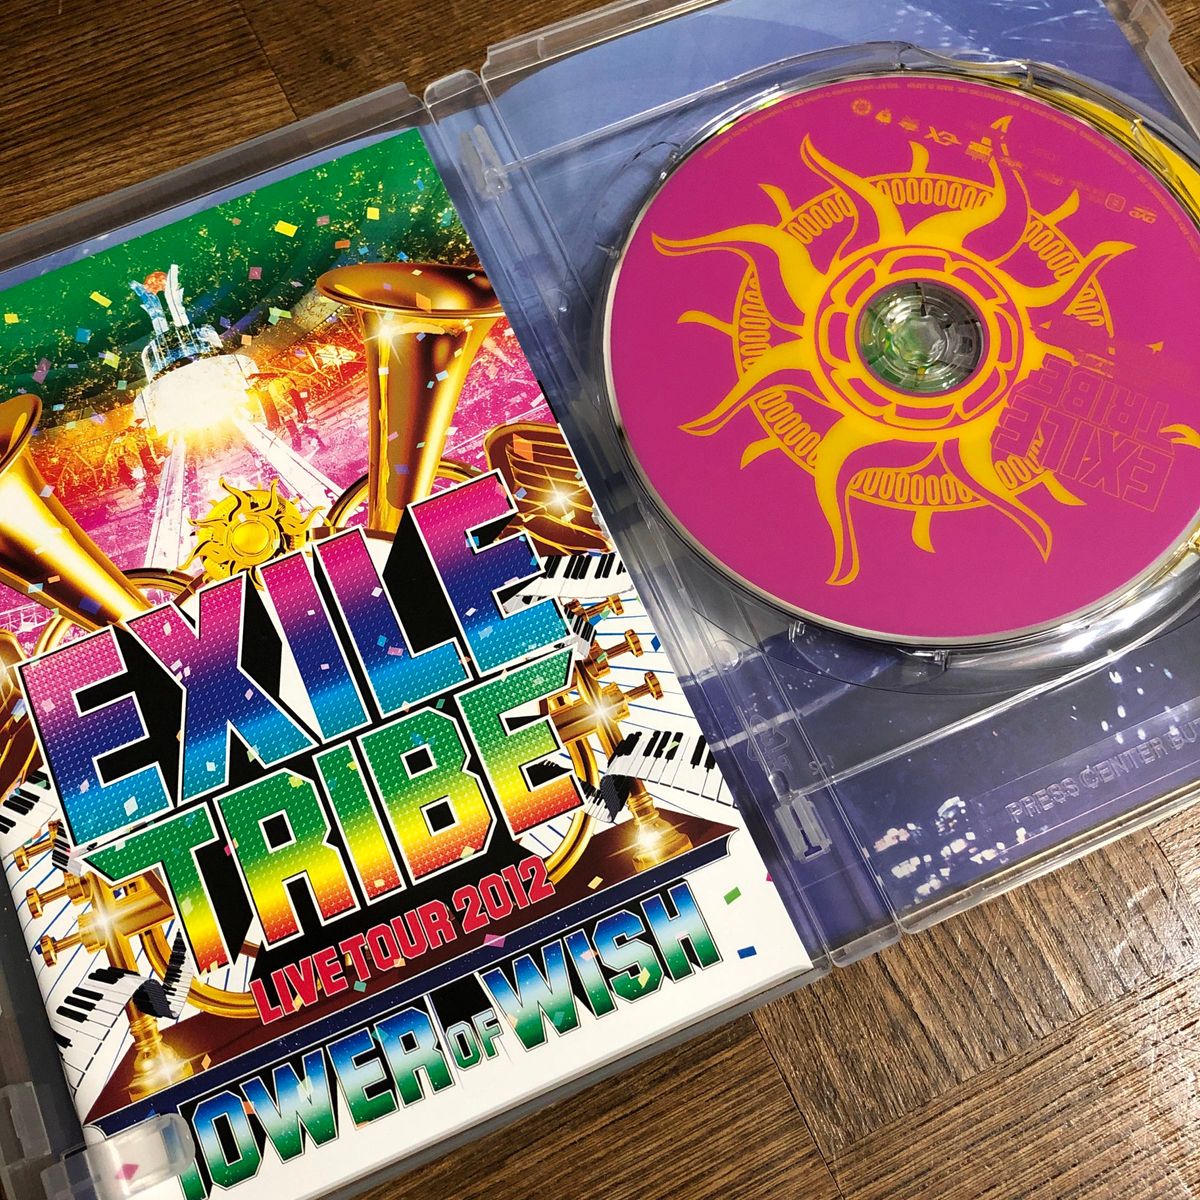 EXILE 2DVD/EXILE TRIBE LIVE TOUR 2012 TOWER OF WISH 12/10/17